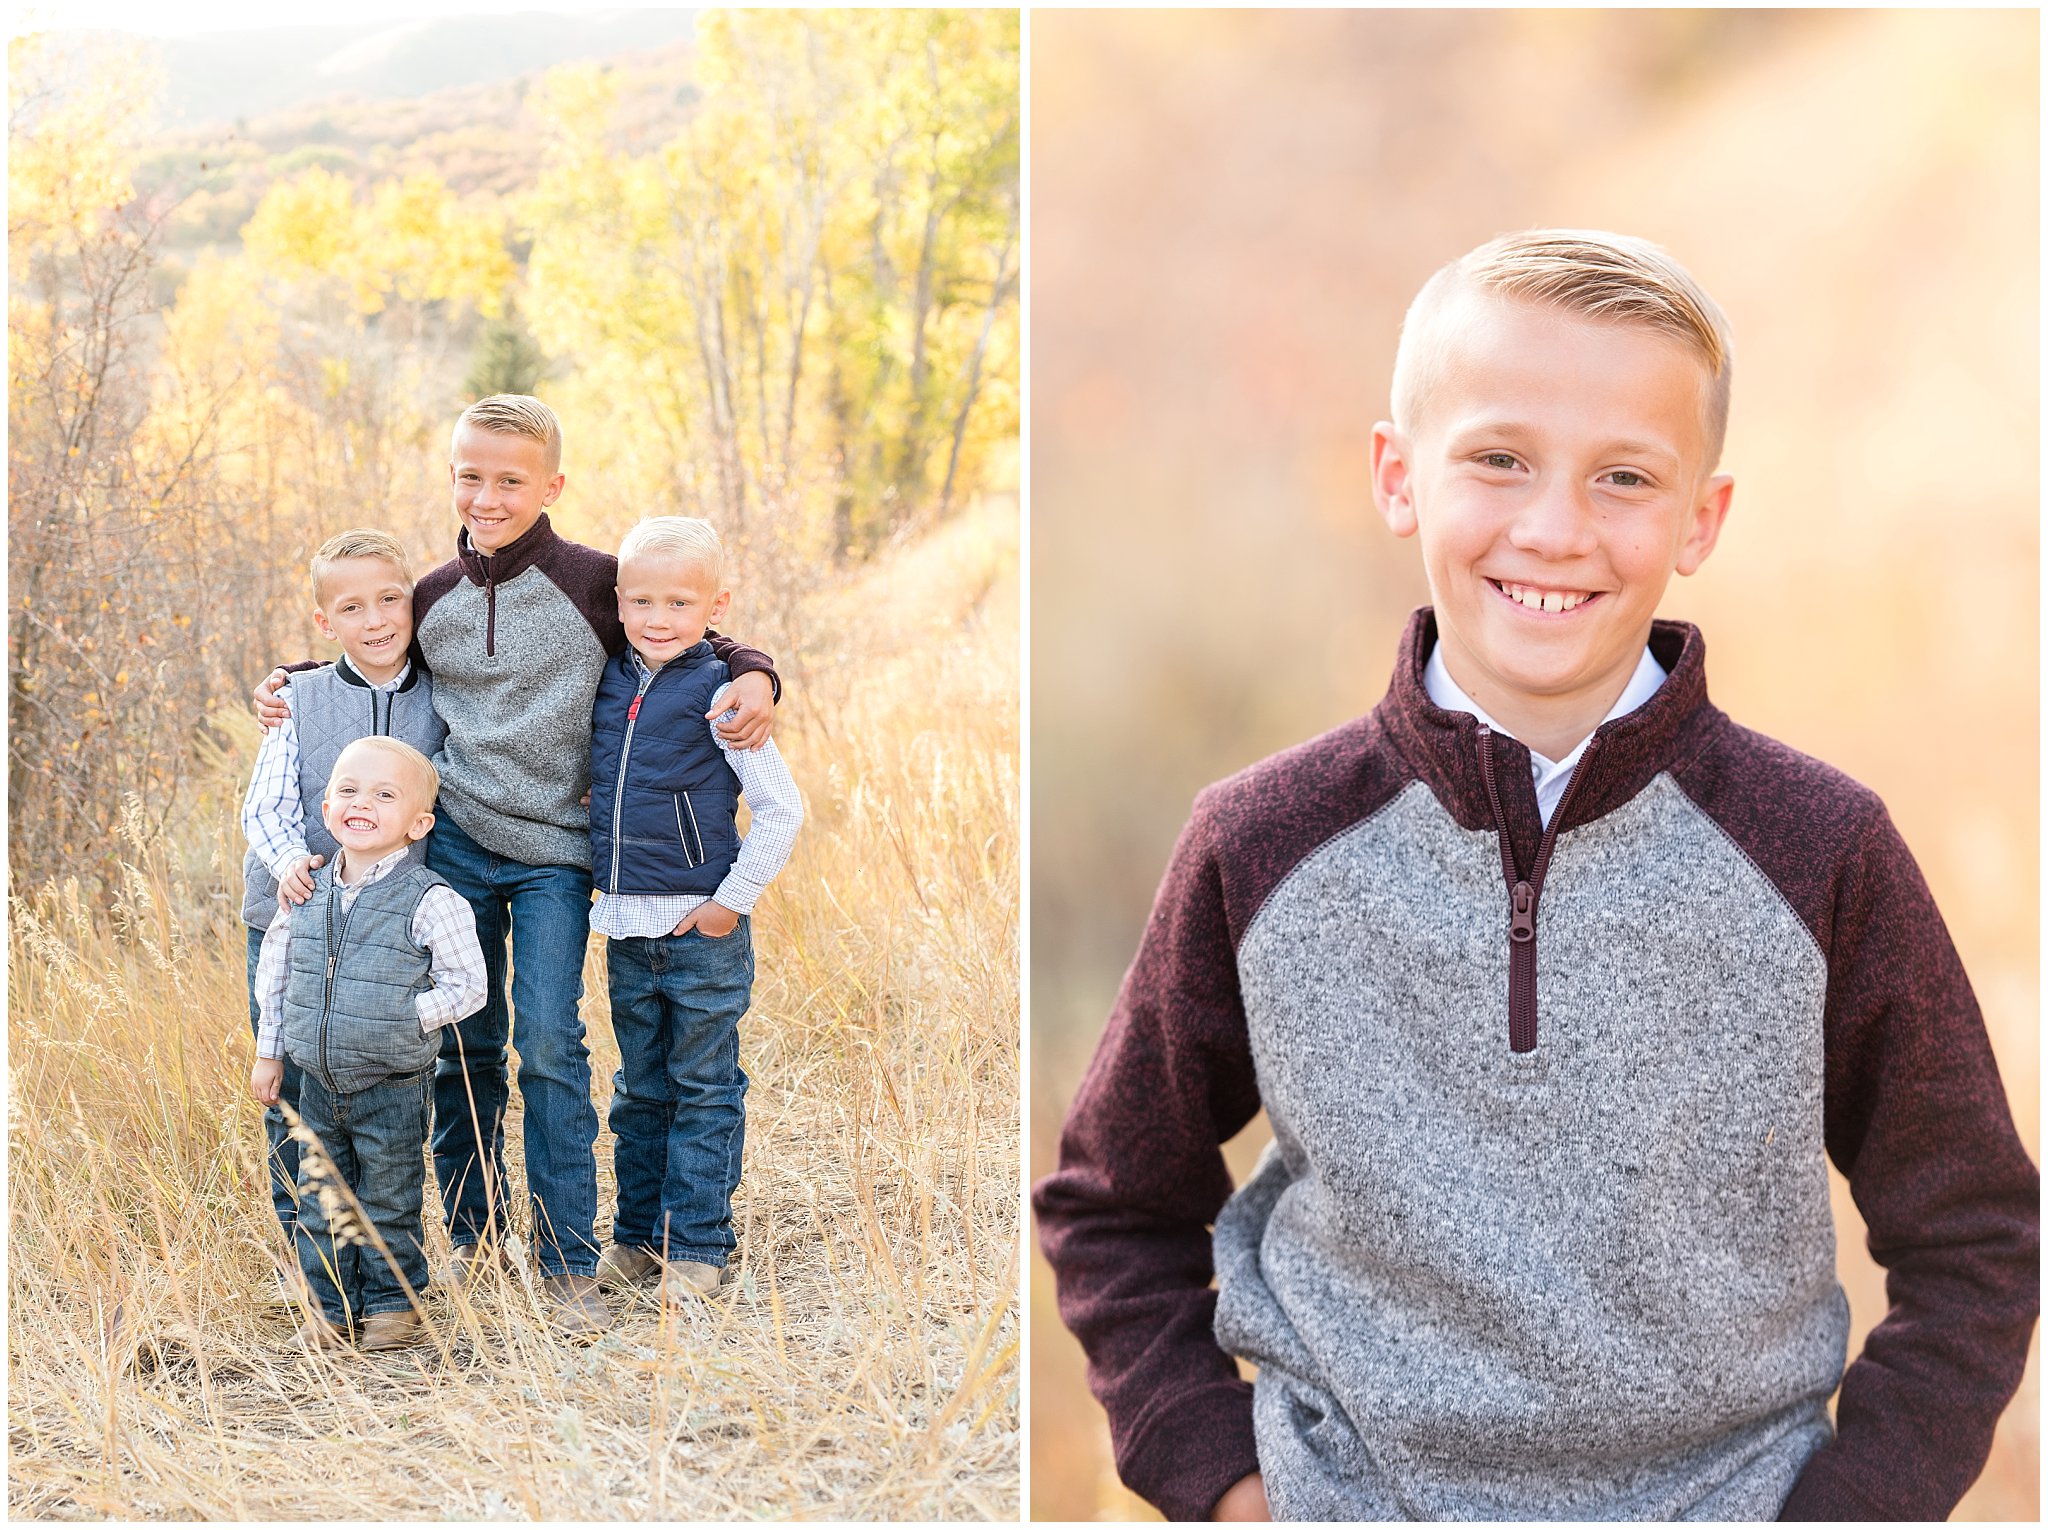 Brothers smiling at the camera | Fall family photo session at Snowbasin | Snowbasin Resort | Jessie and Dallin Photography